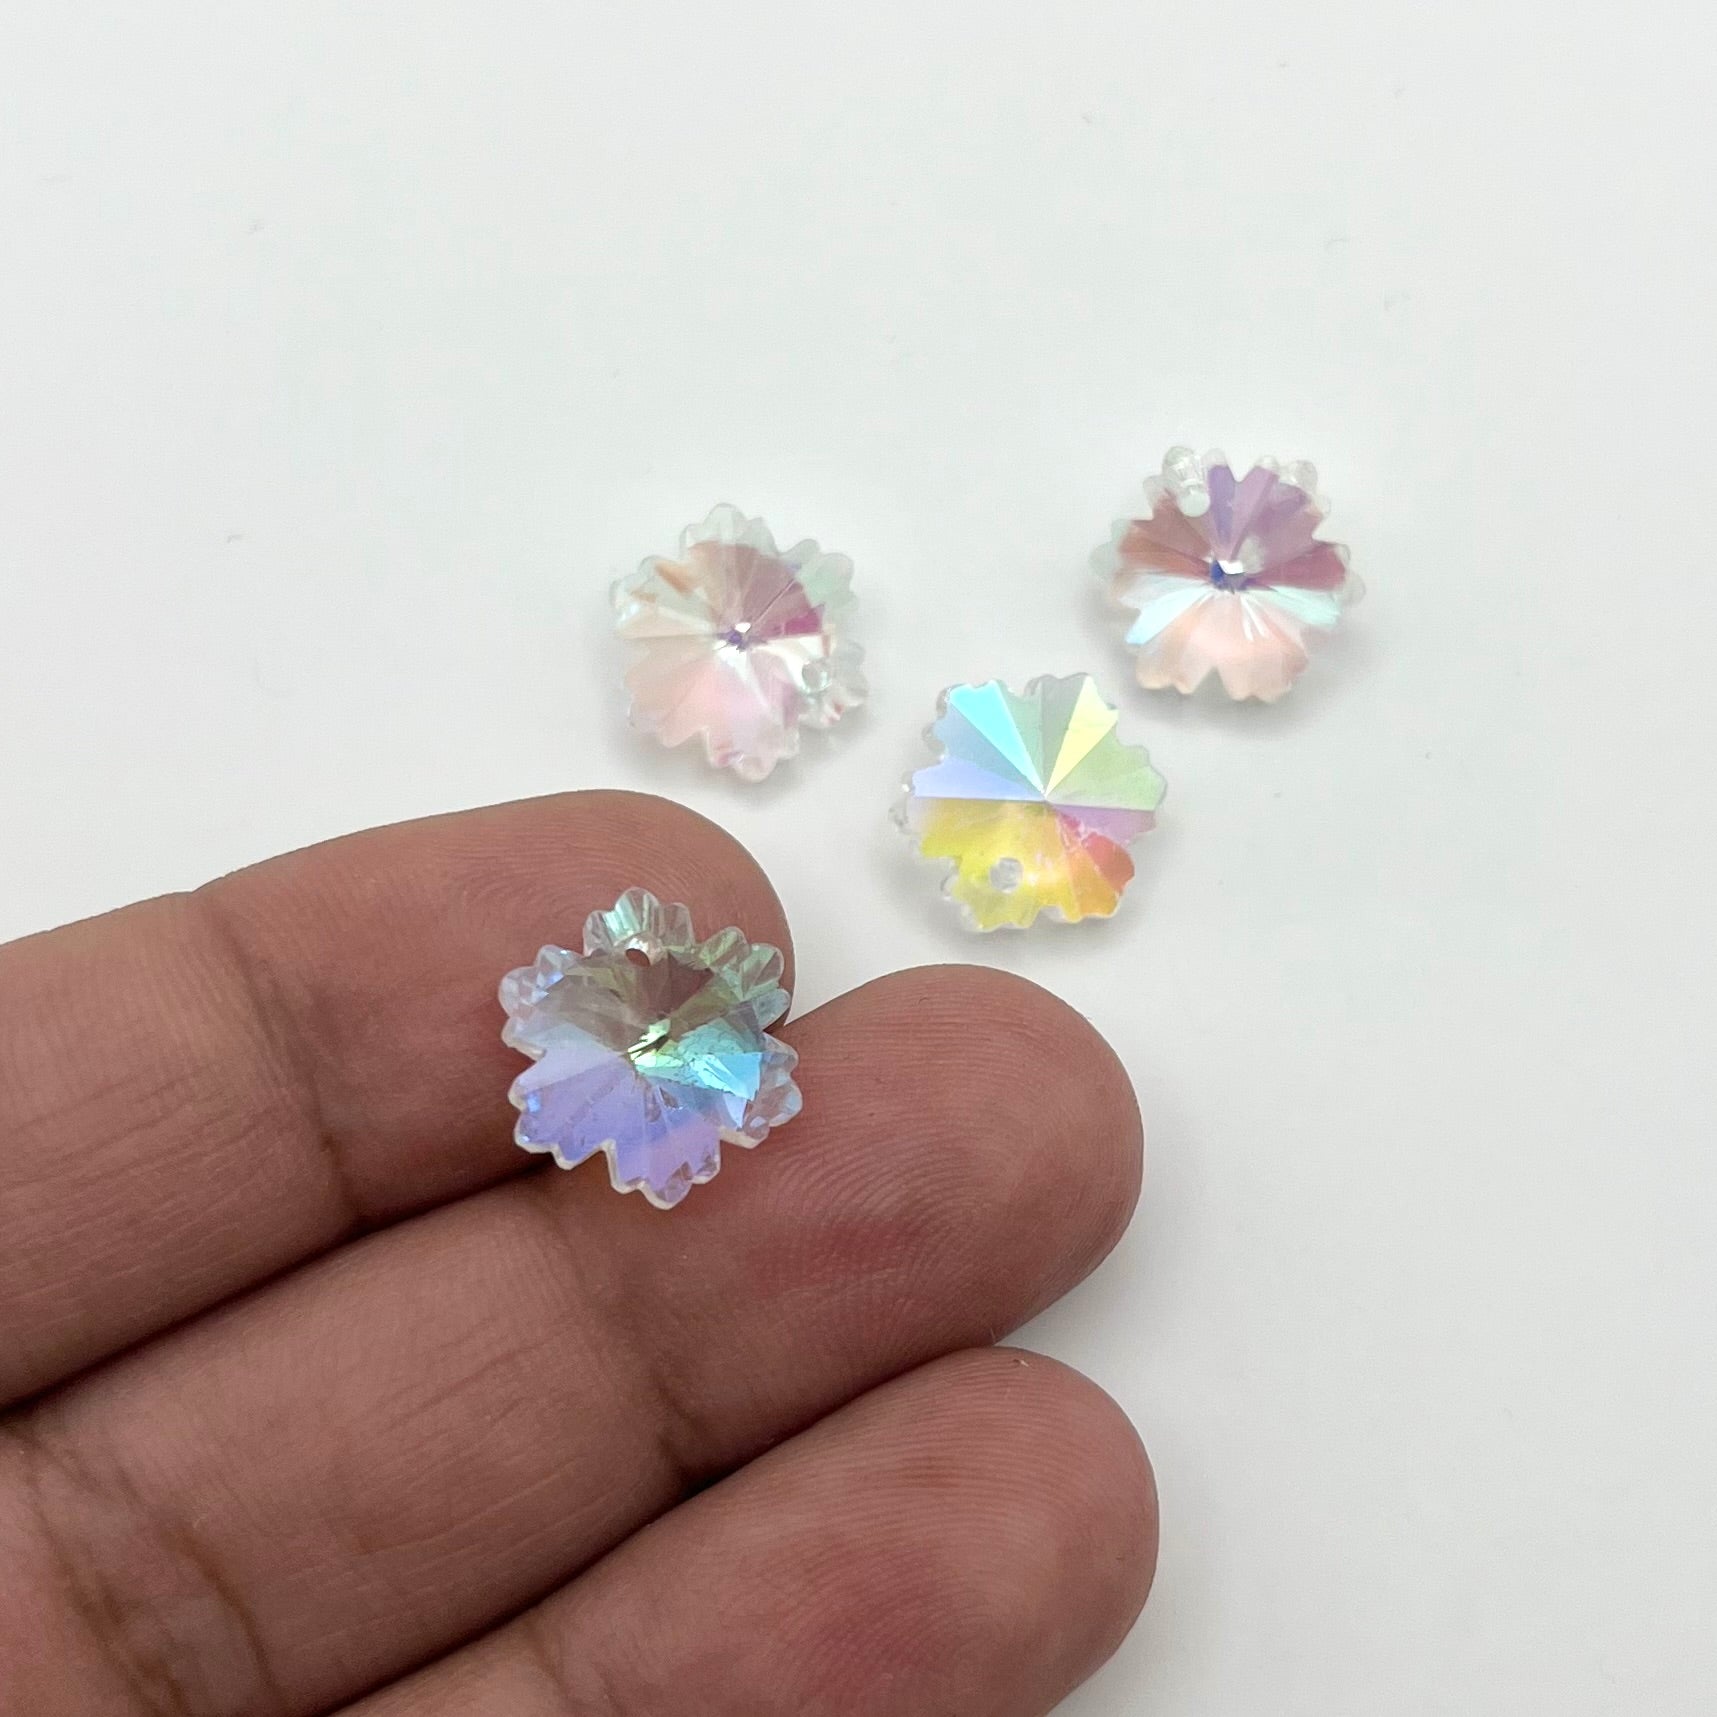 .5 Inch Iridescent Faceted Glass Snowflake Bead 4pk